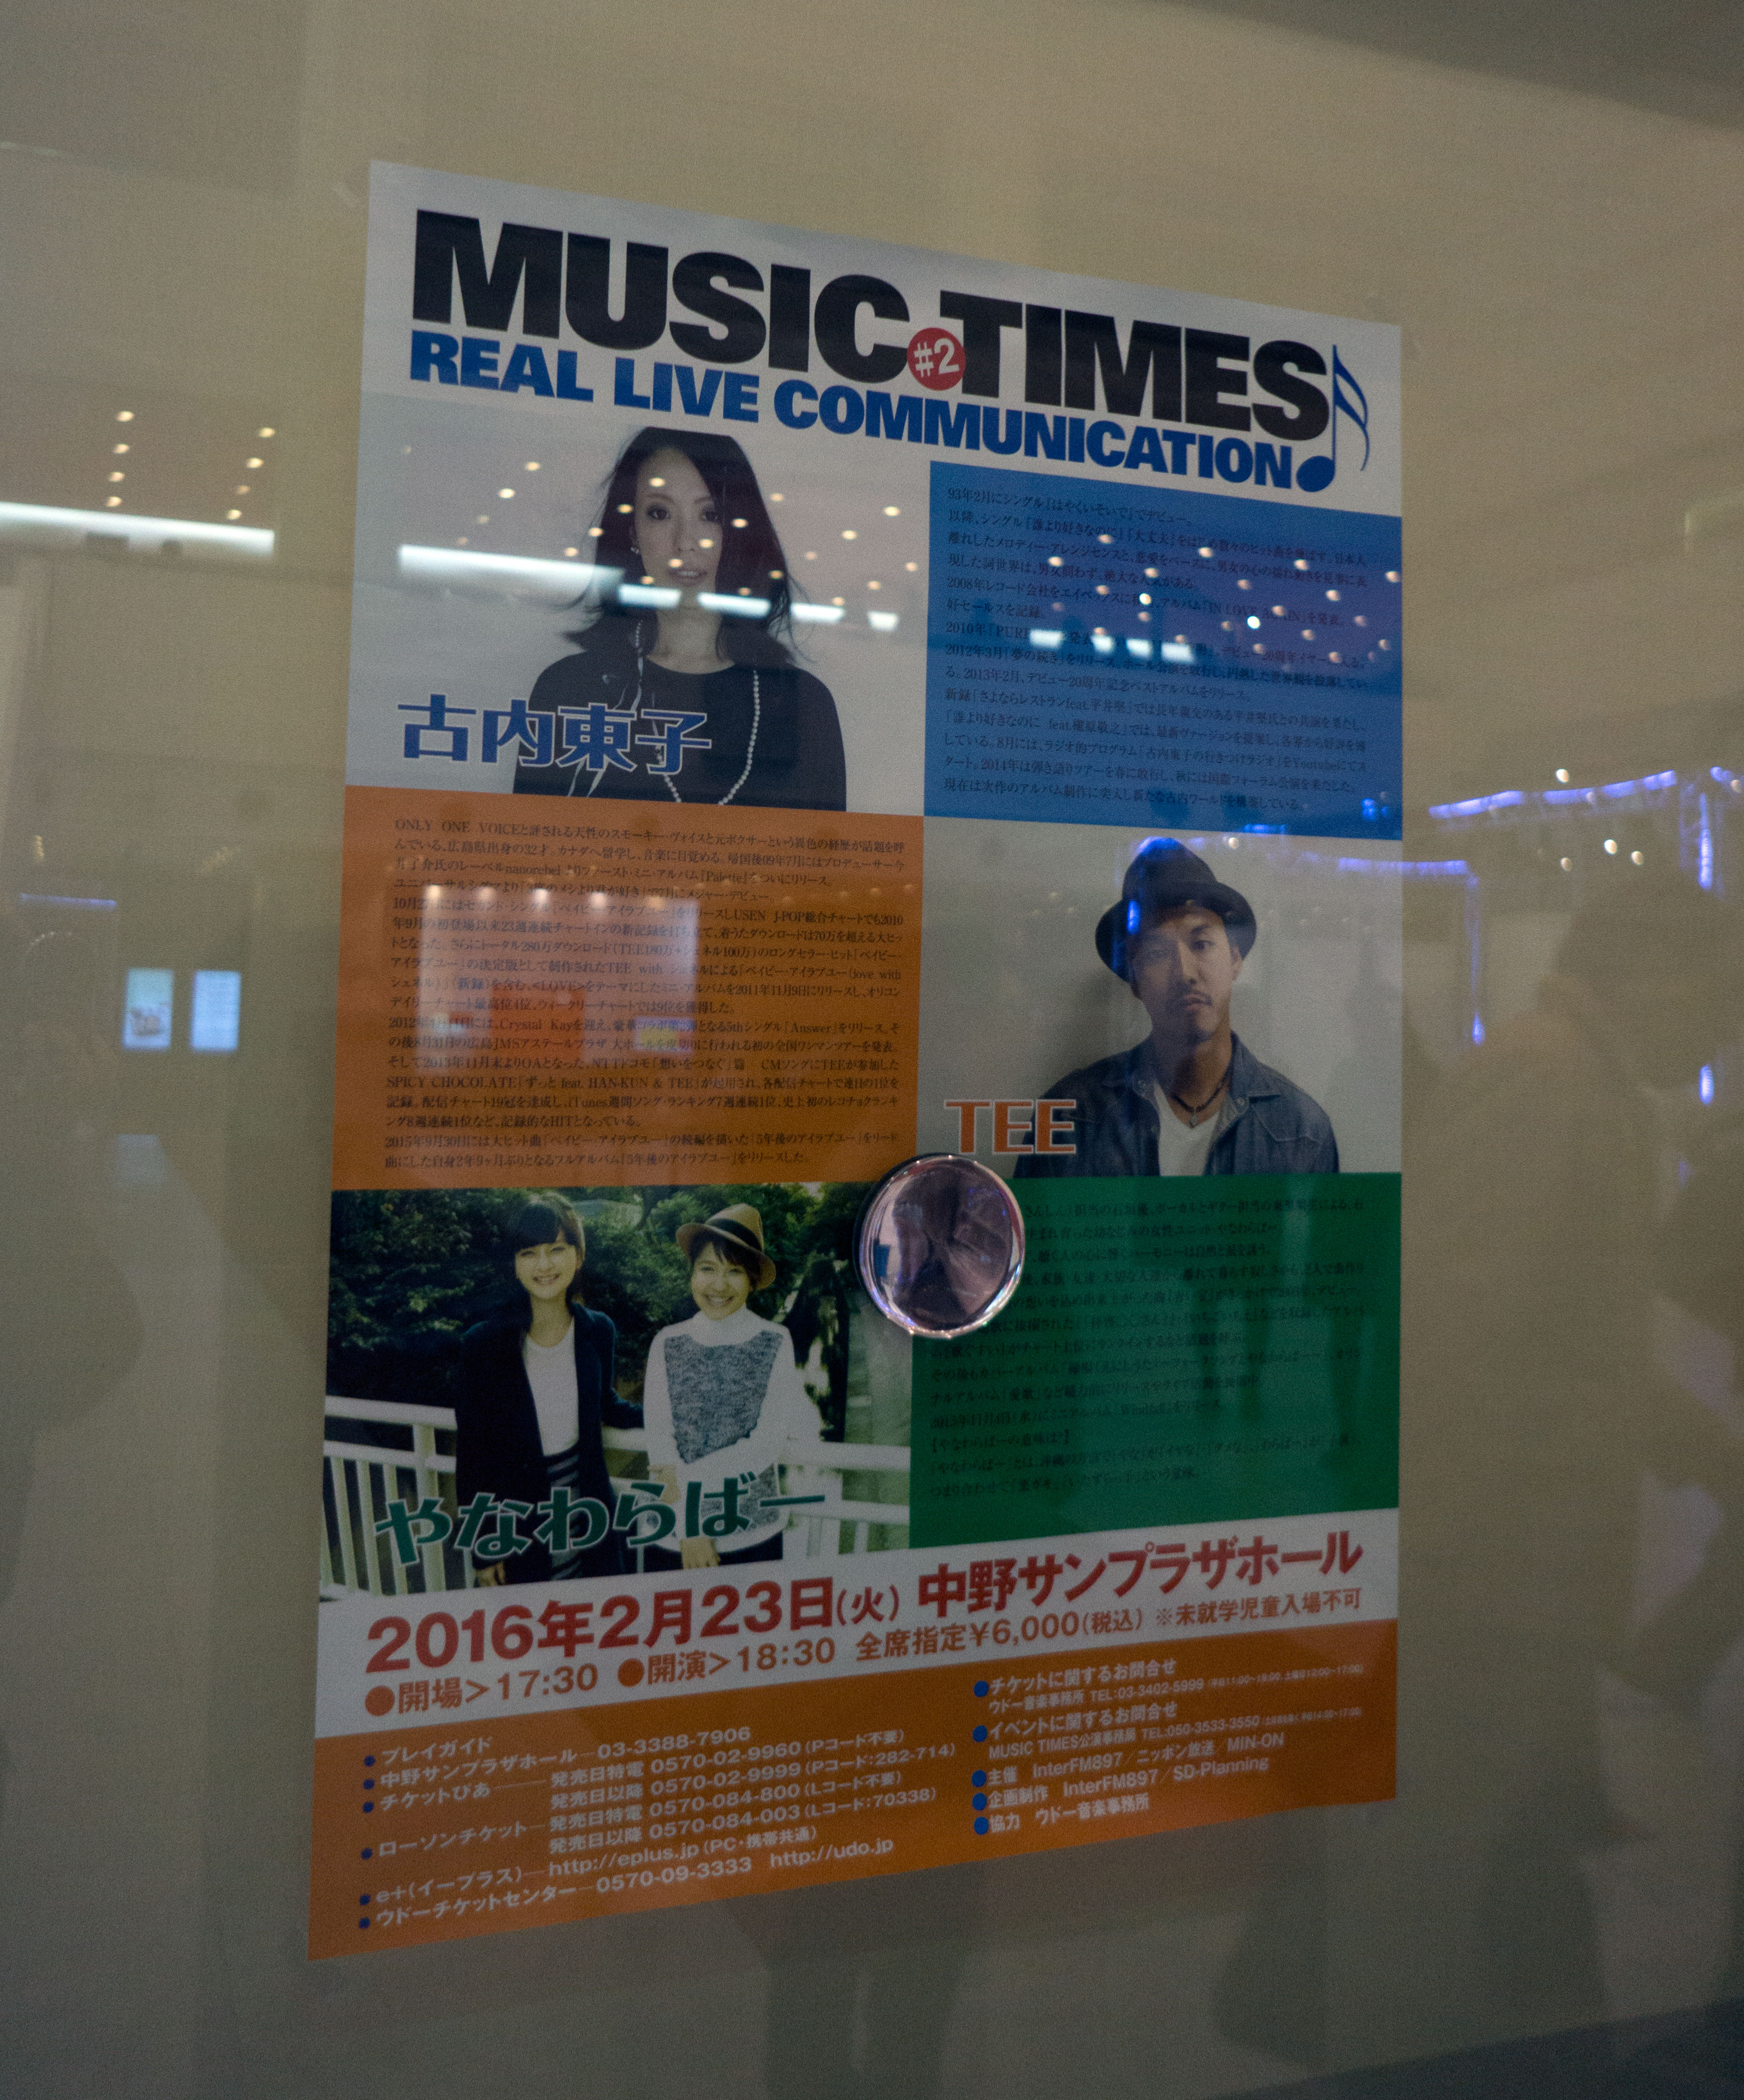 REAL LIVE COMMUNICATION「MUSIC TIMES」#02